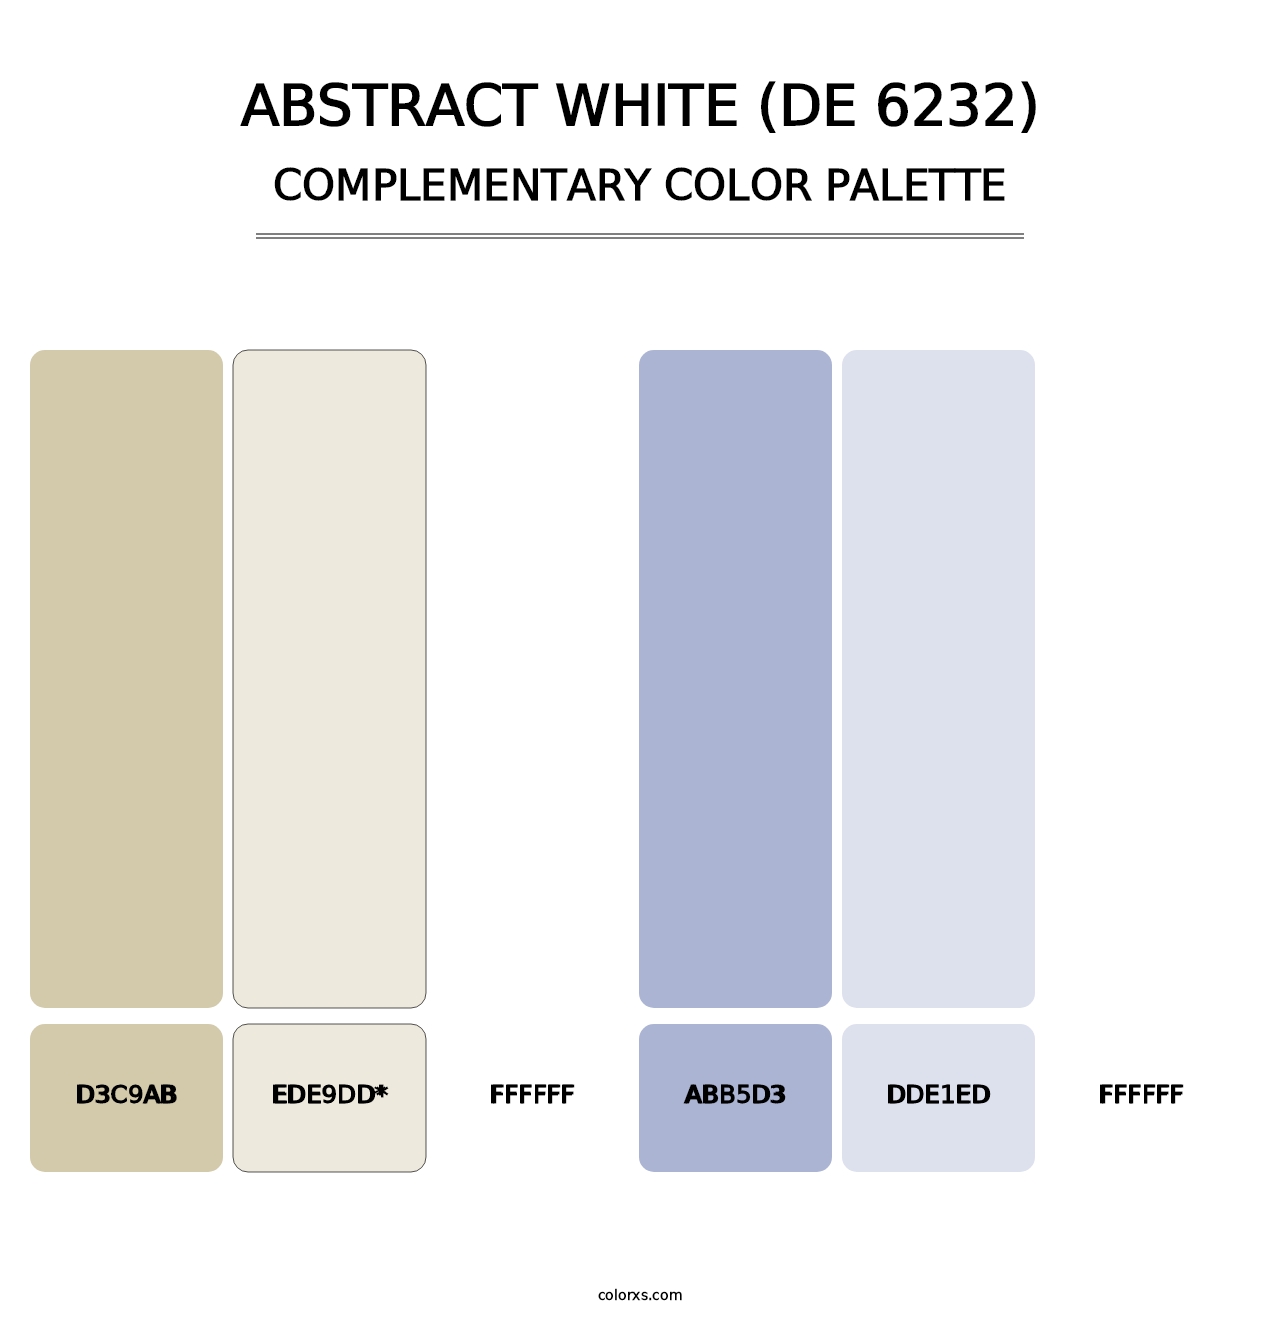 Abstract White (DE 6232) - Complementary Color Palette